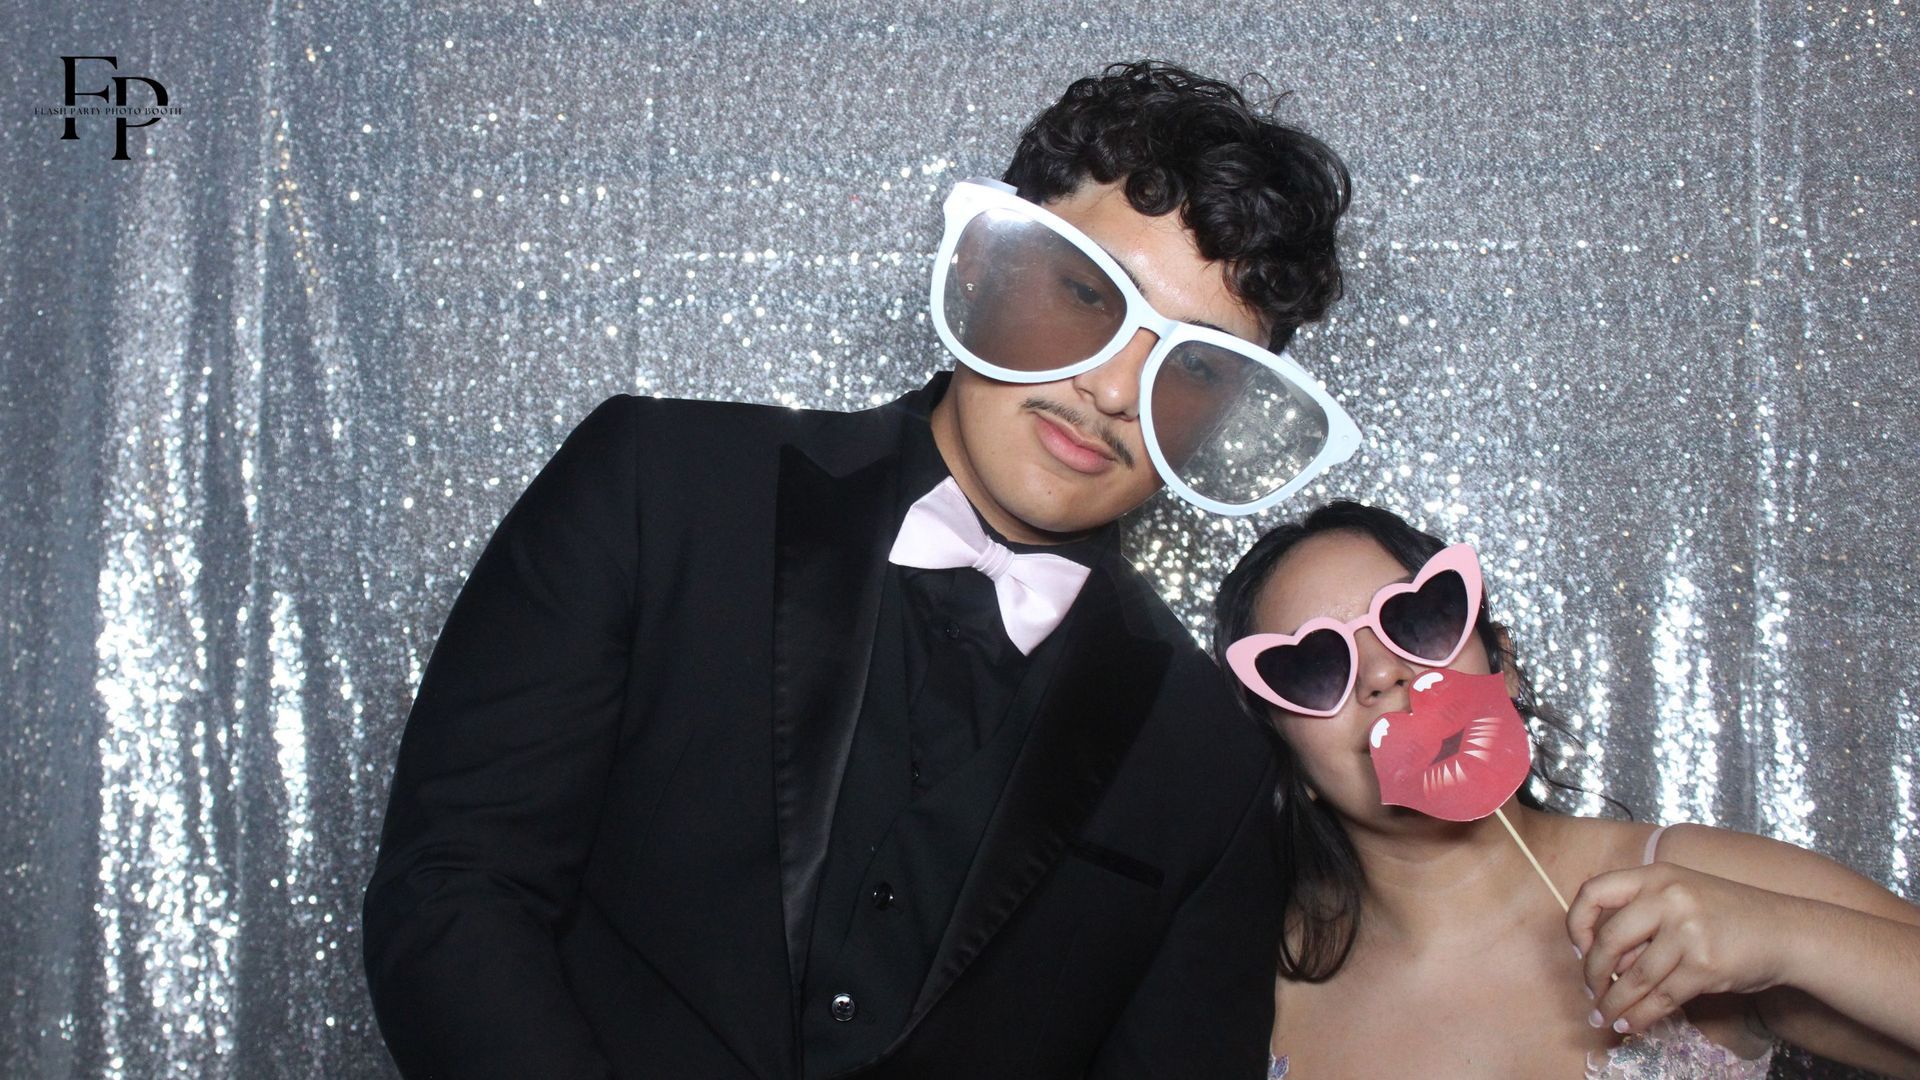 A man and a woman with shades having fun in a Mirror Photo Booth.